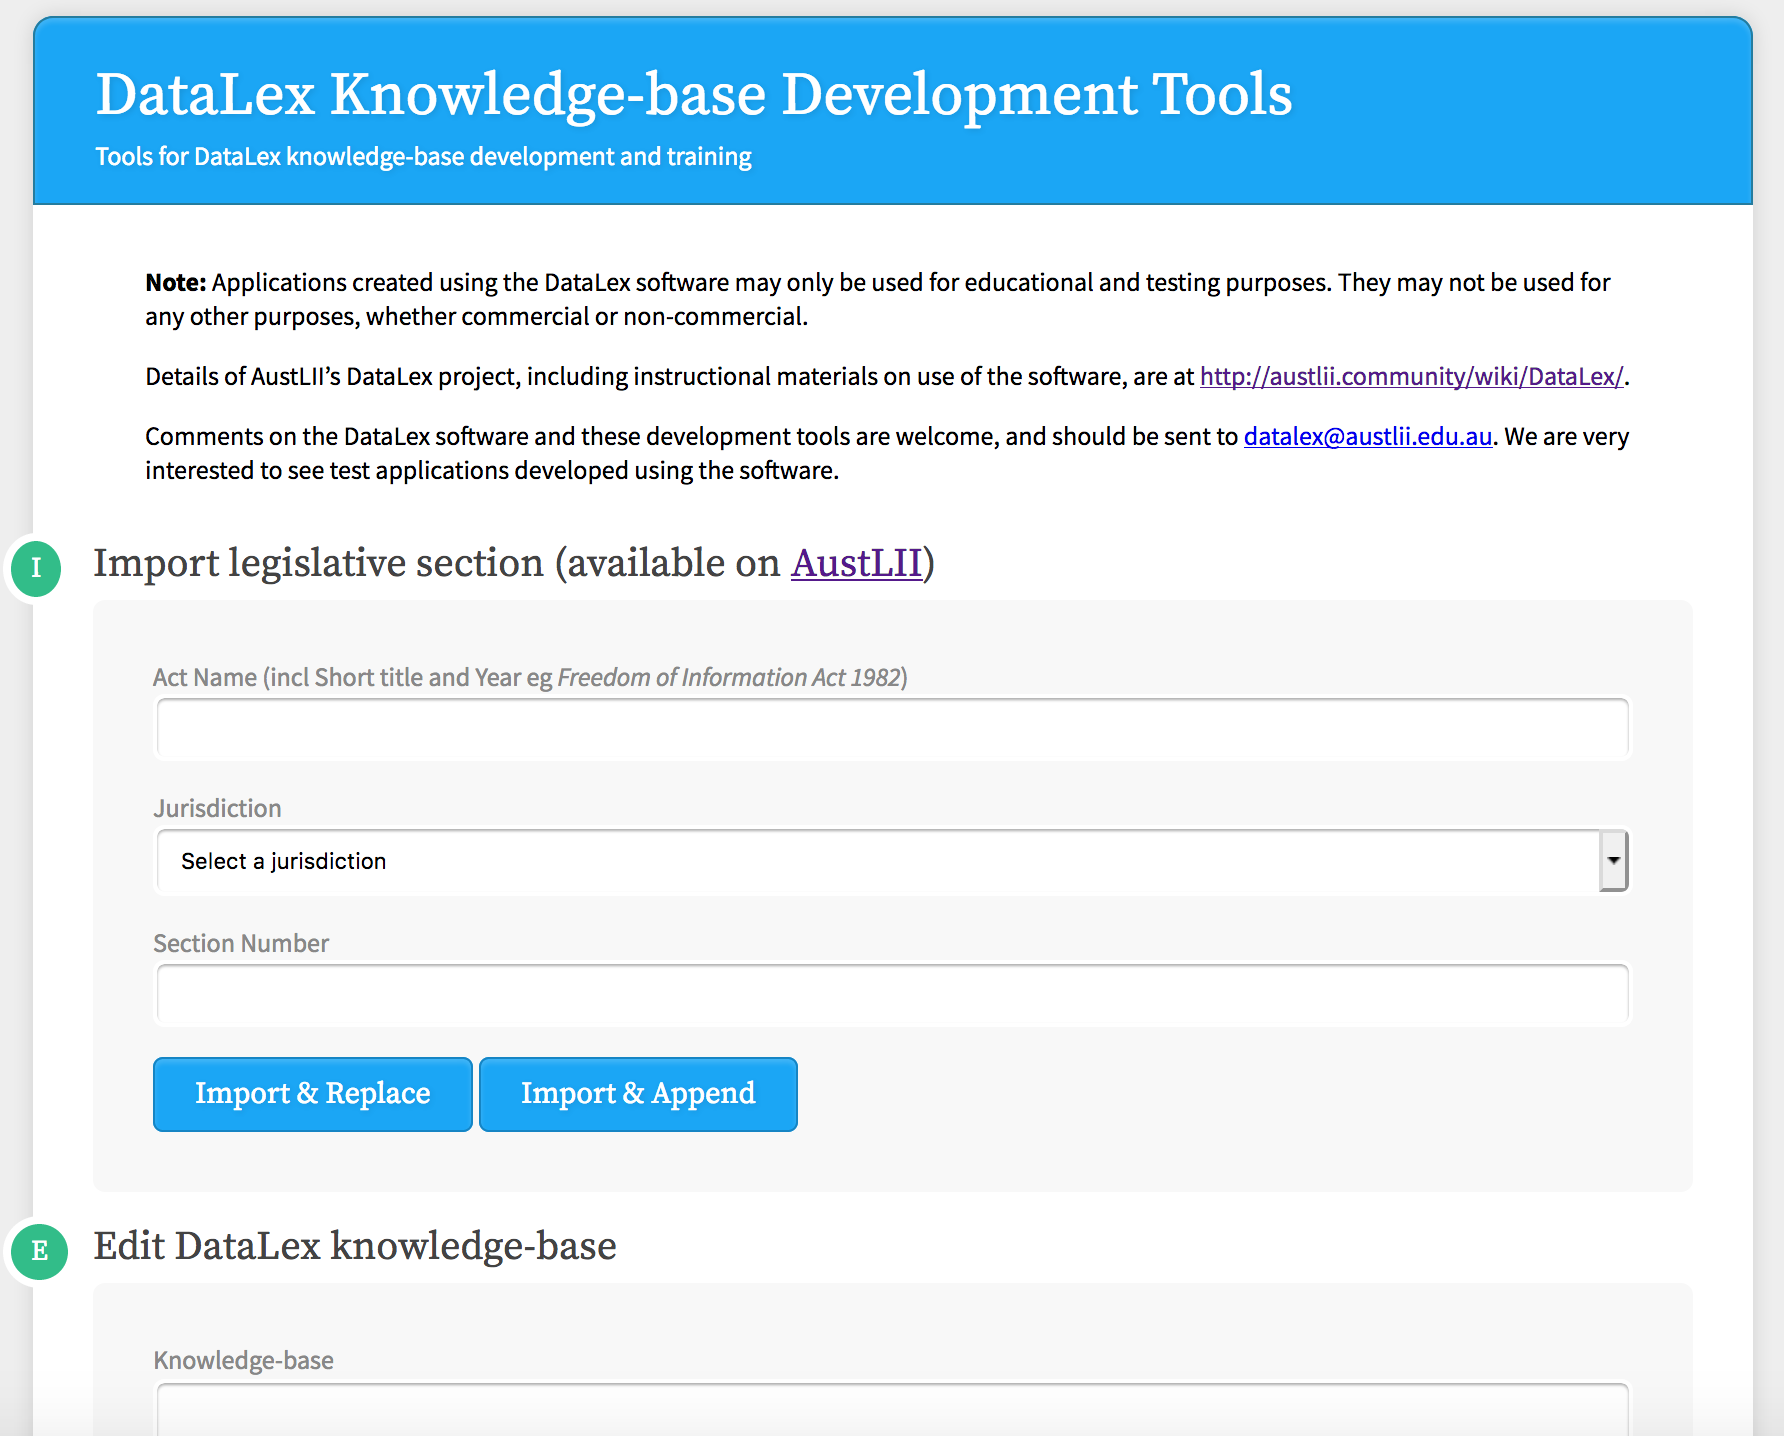 DataLex knowledge-base development tools: Importing and Editing rules